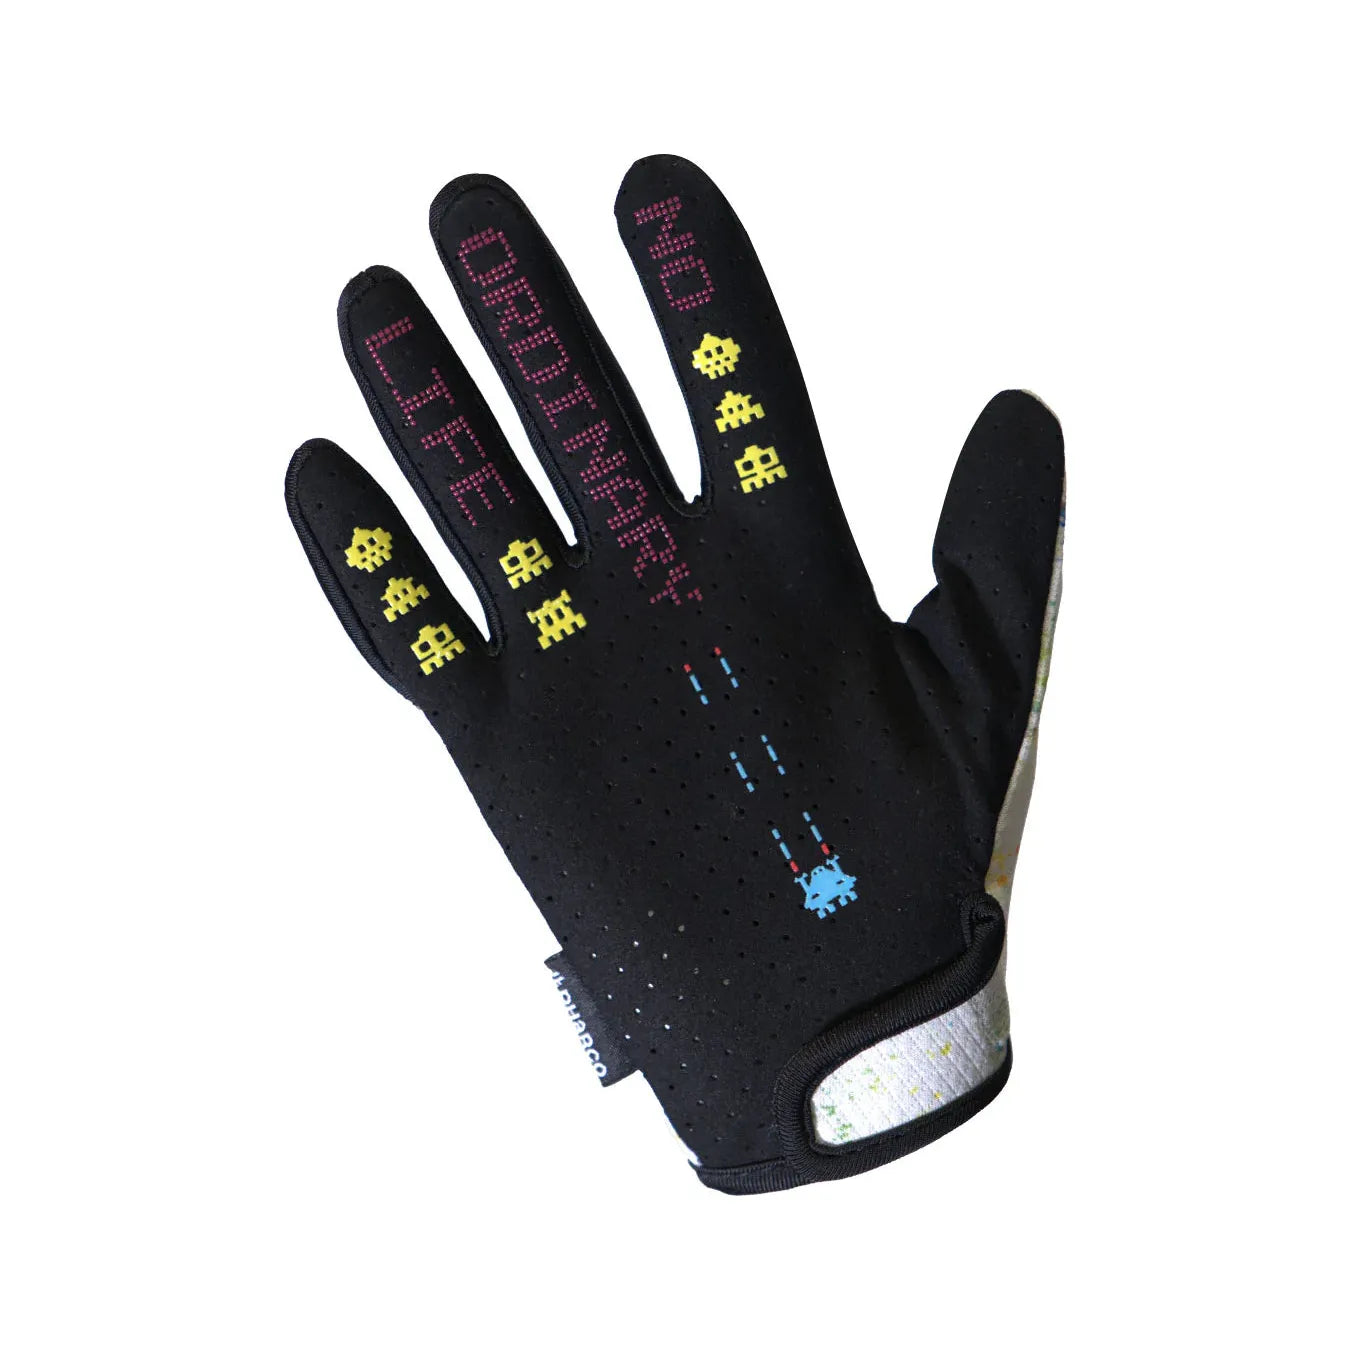 DHaRCO Youth Race Gloves - Youth M - Paint Splat